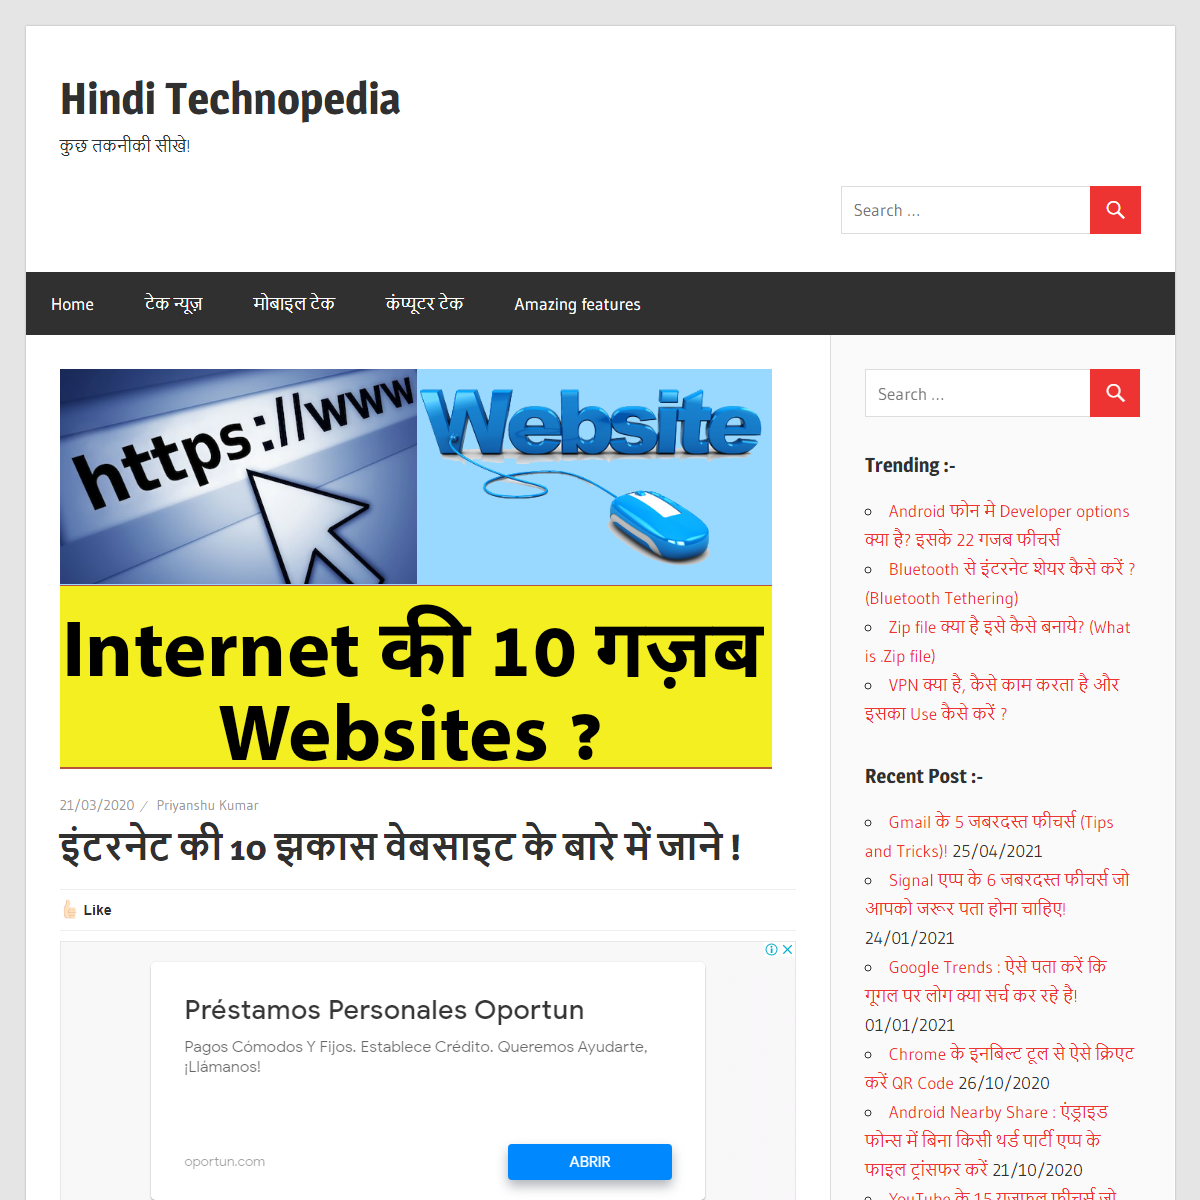 A complete backup of https://hinditechnopedia.com/10-amazing-websites-that-you-must-try-hindi/